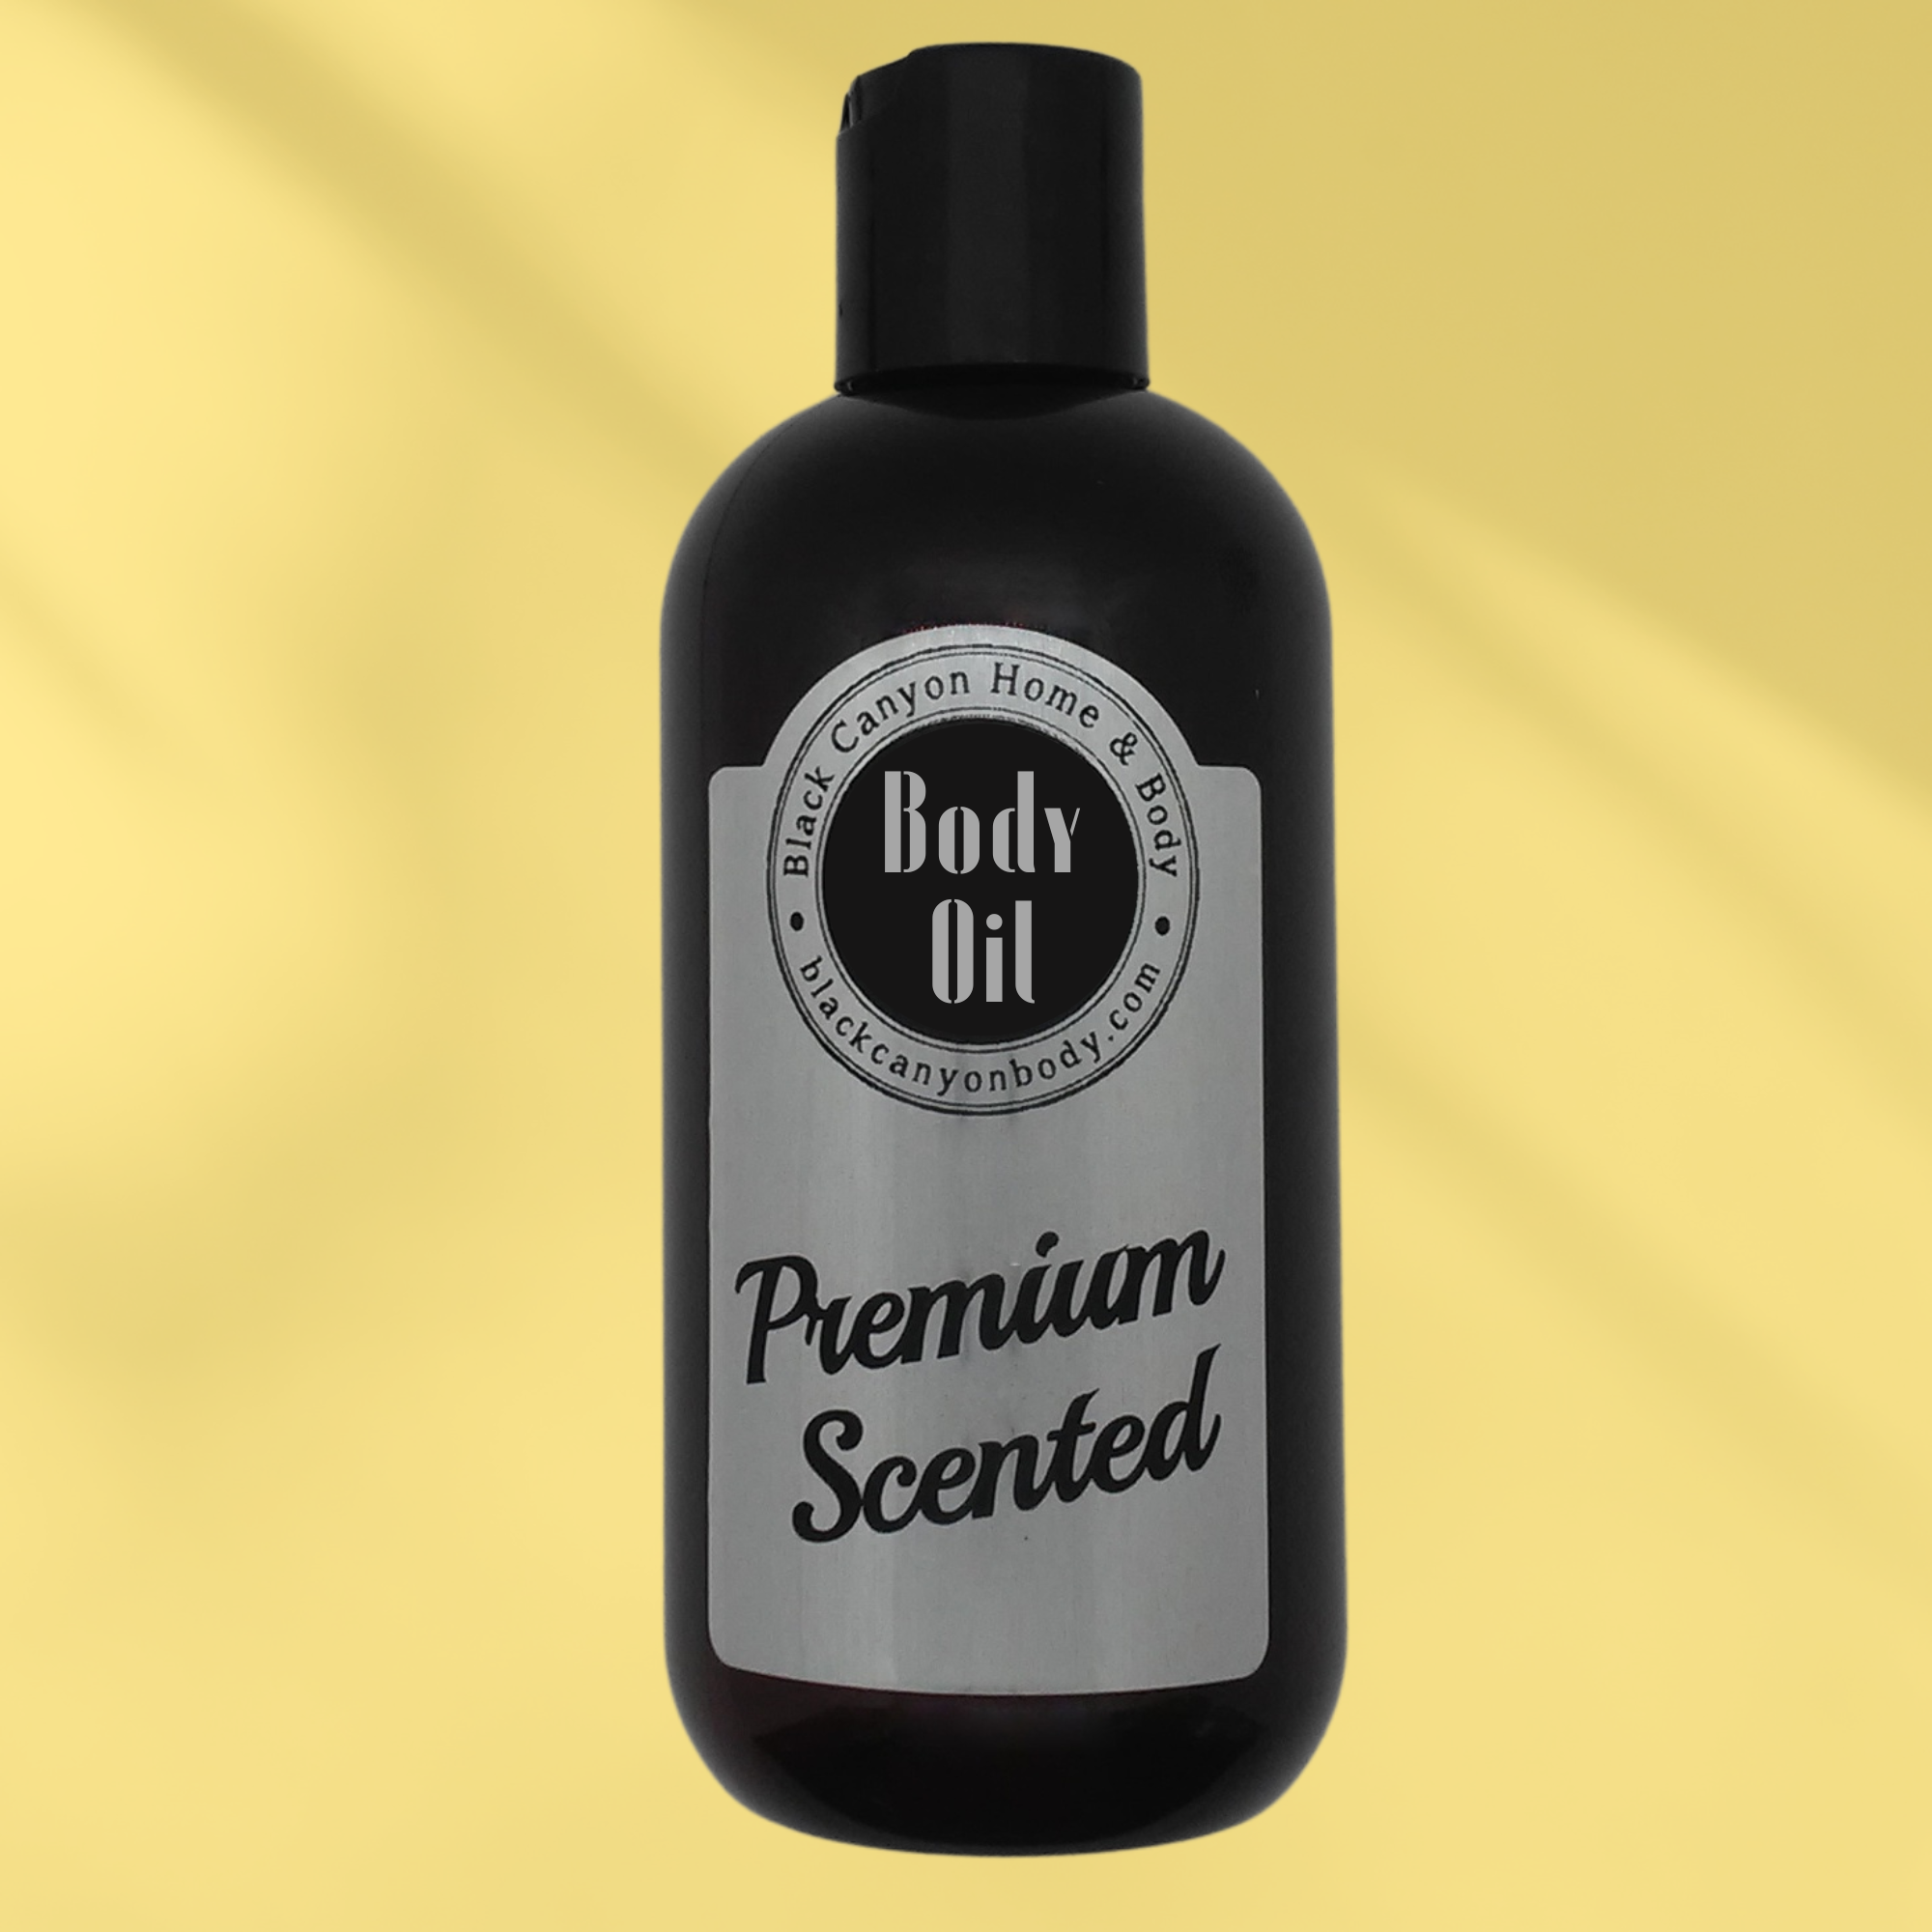 Black Canyon Island Rum Scented Body Oil